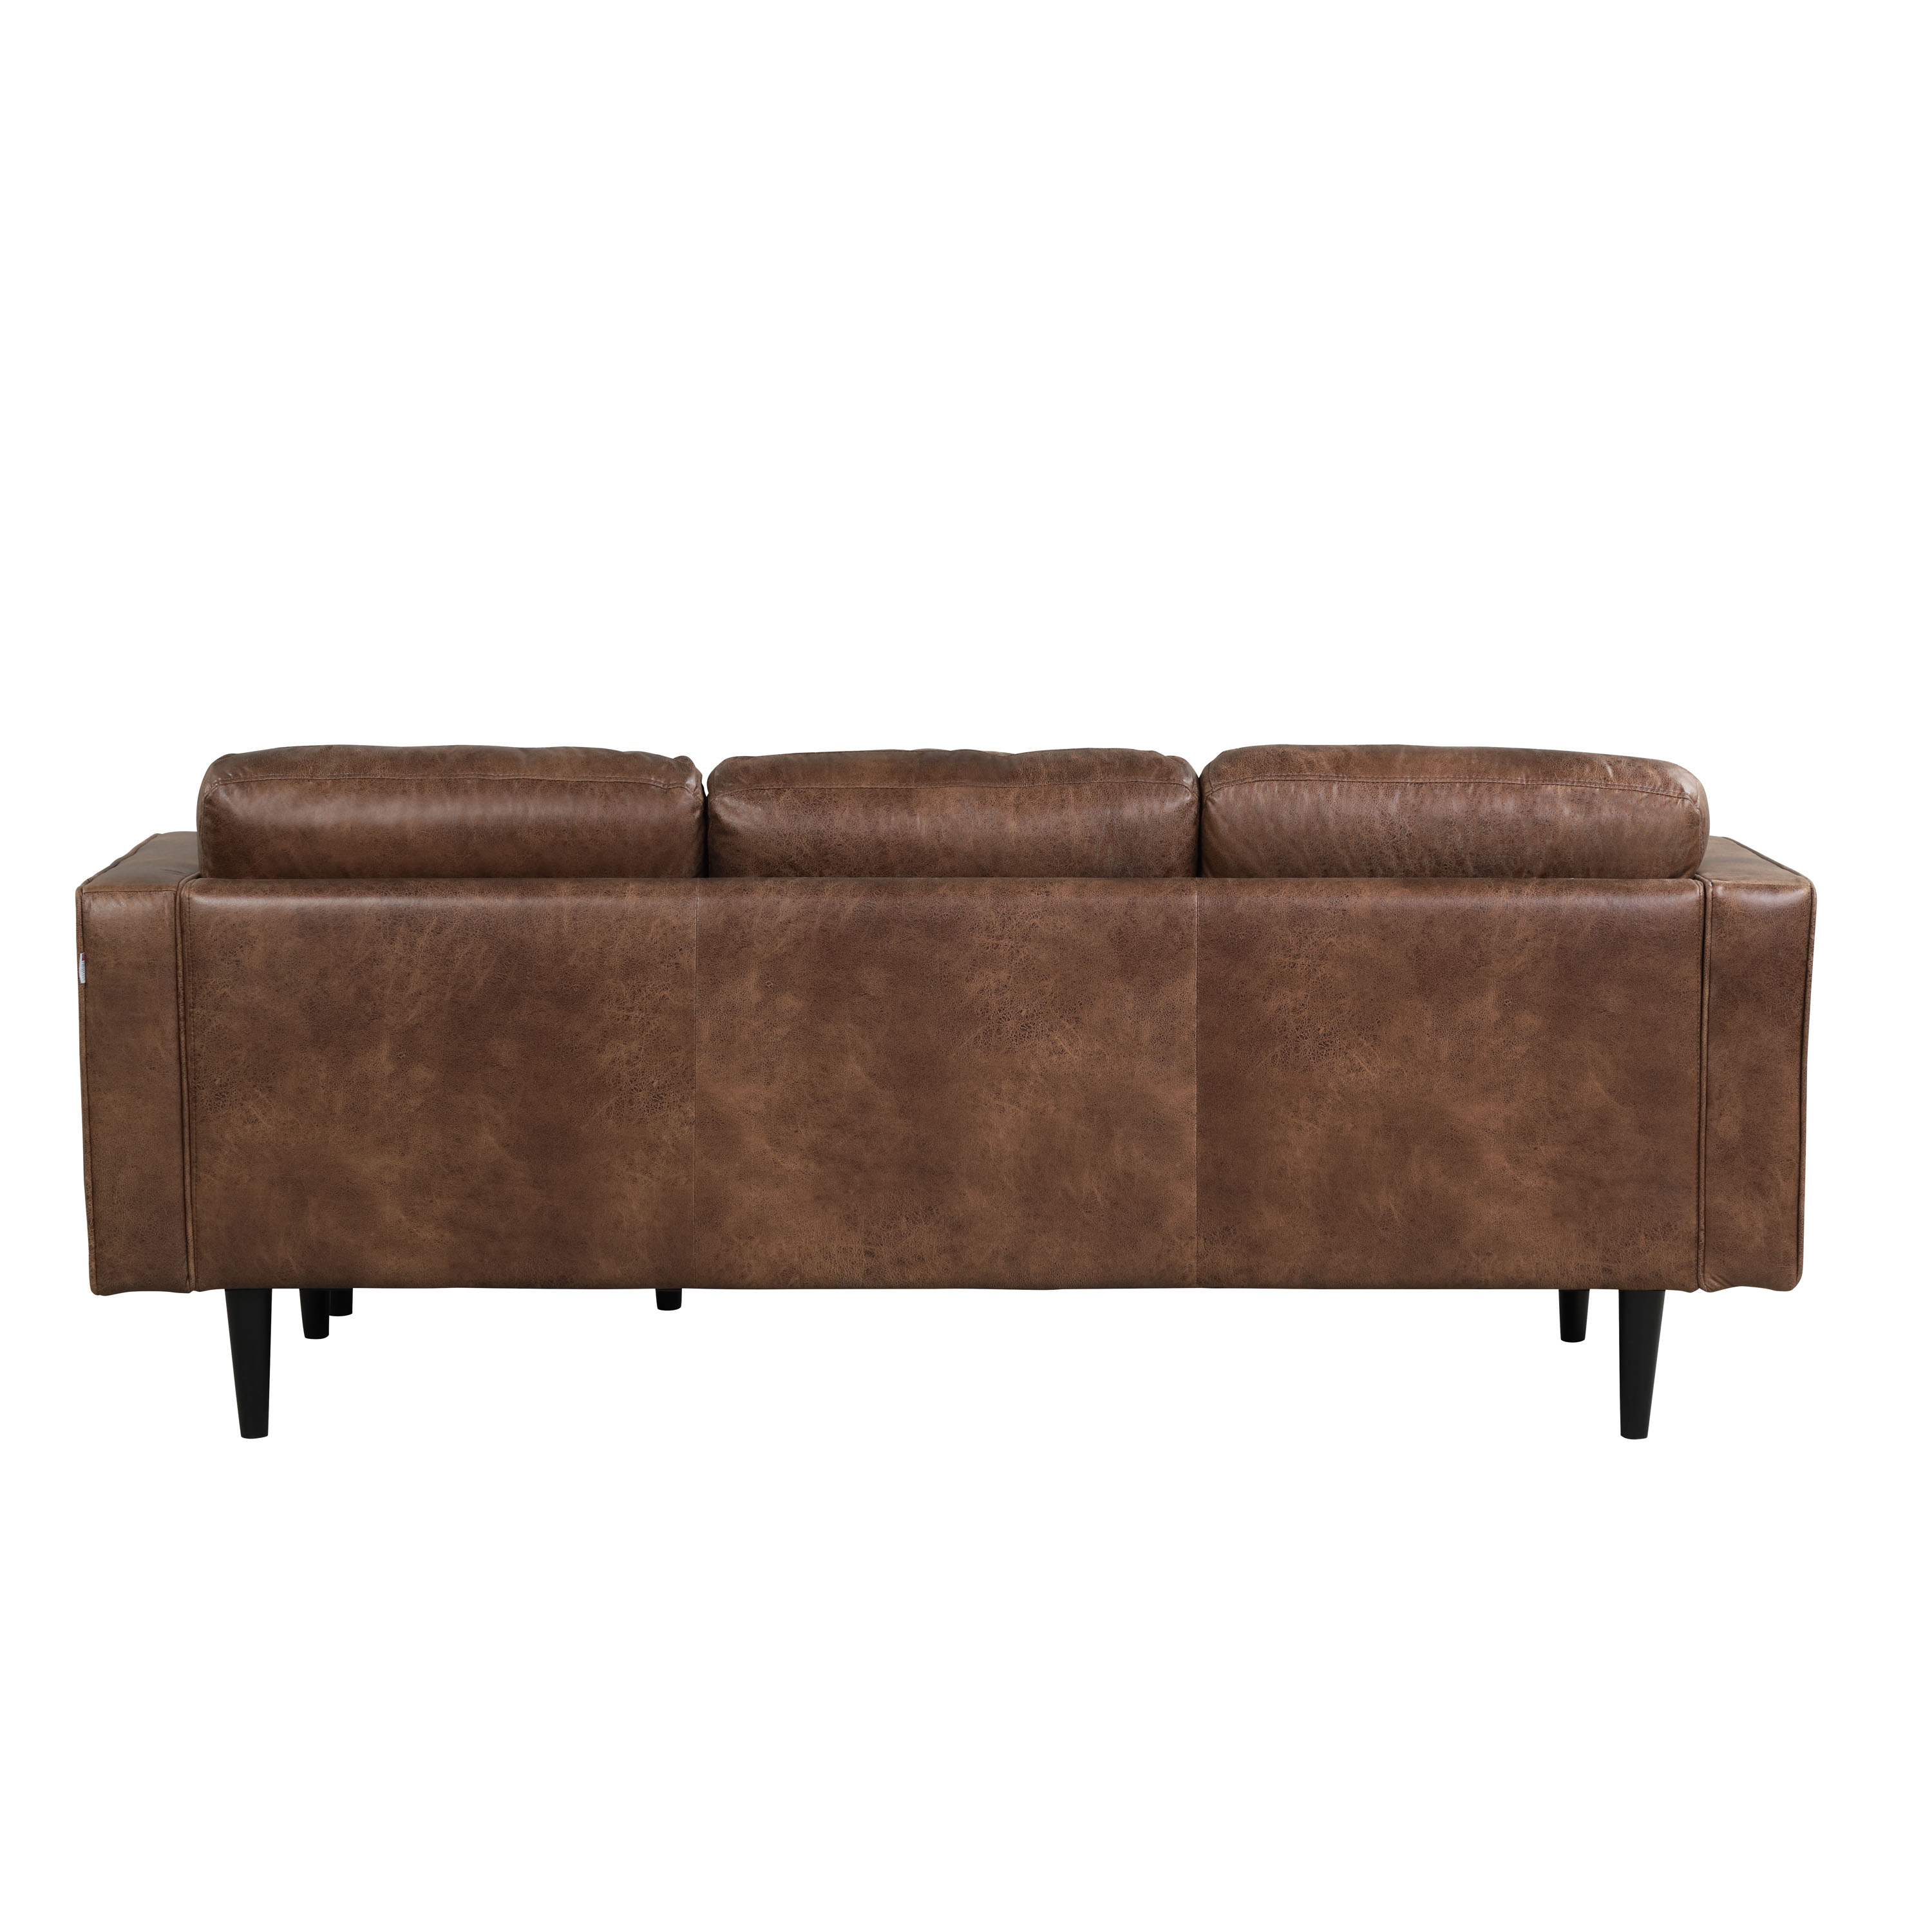 Lifestyle Solutions Manila Modern Sectional Sofa with Chaise, Brown Faux Leather - image 4 of 5